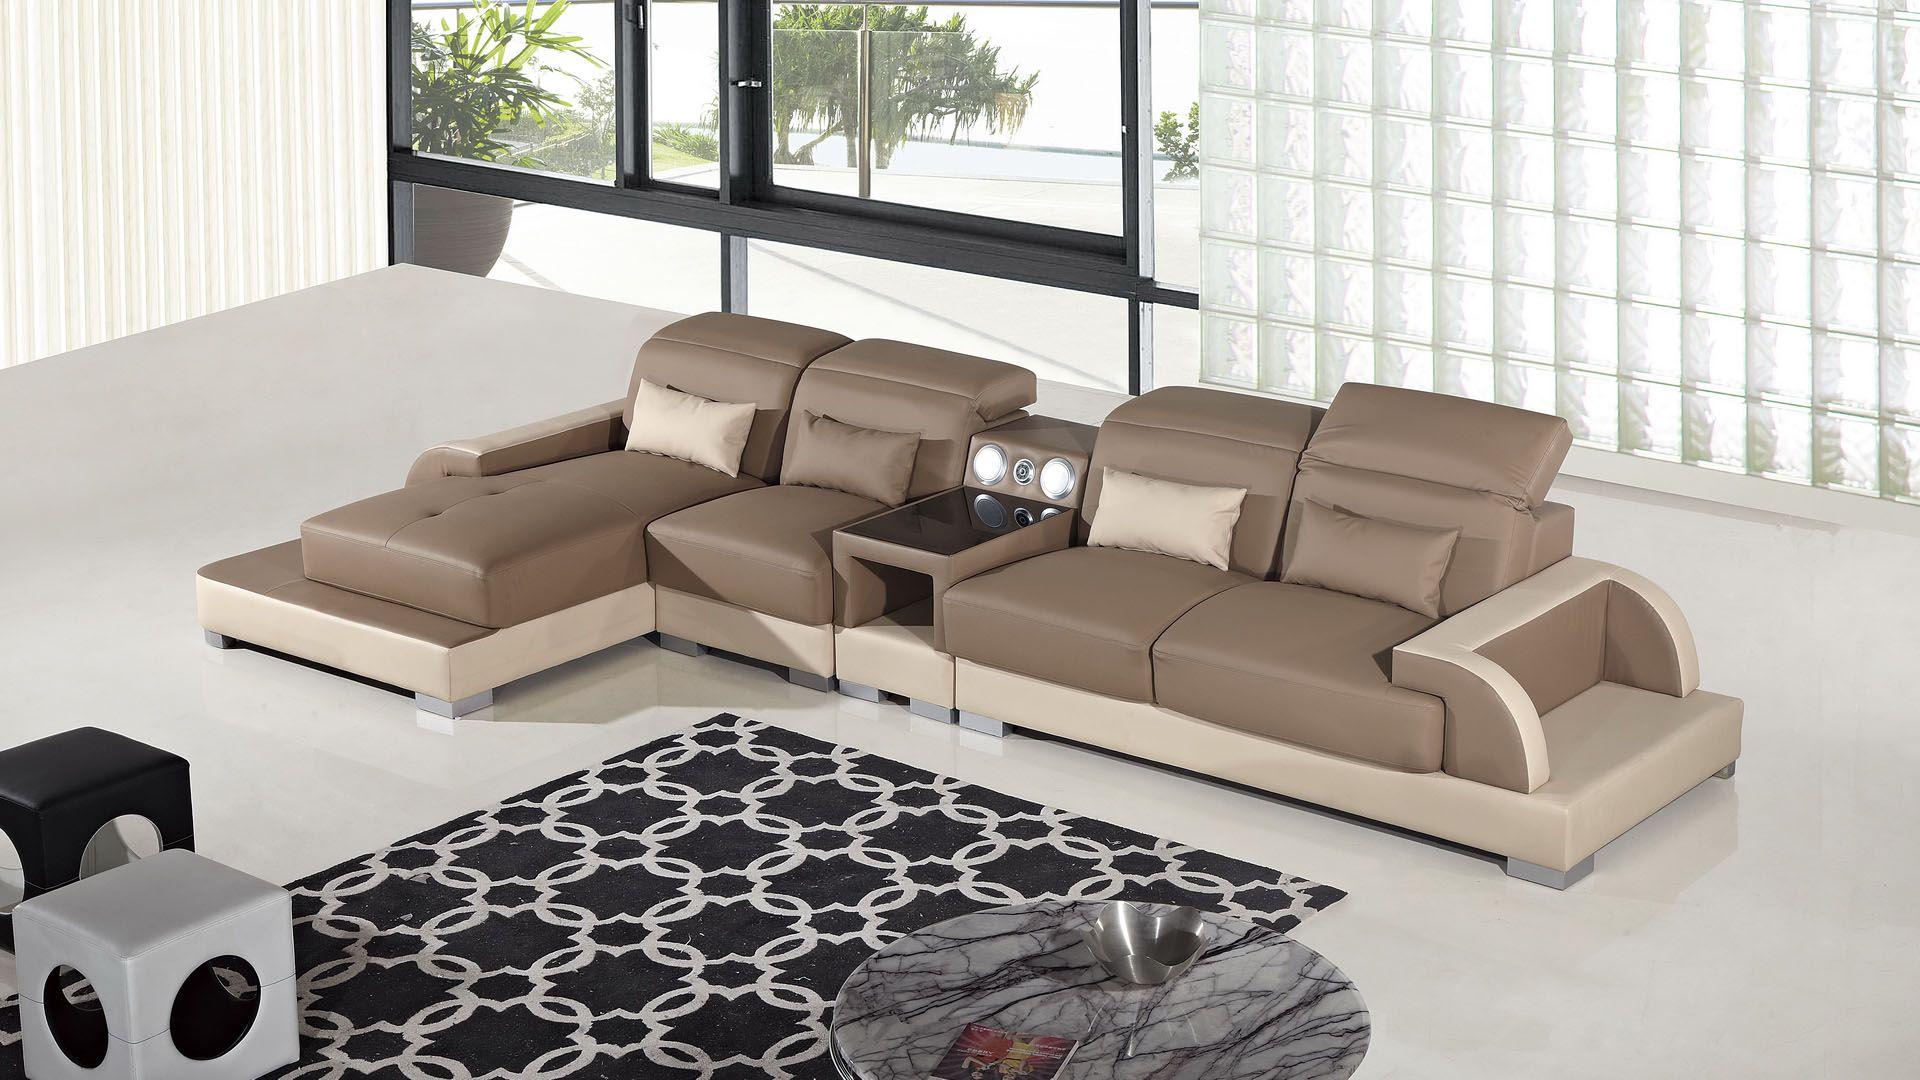 Contemporary, Modern Sectional Sofa AE-LD812-CA.CRM AE-LD812L-CA.CRM in Camel, Cream Faux Leather